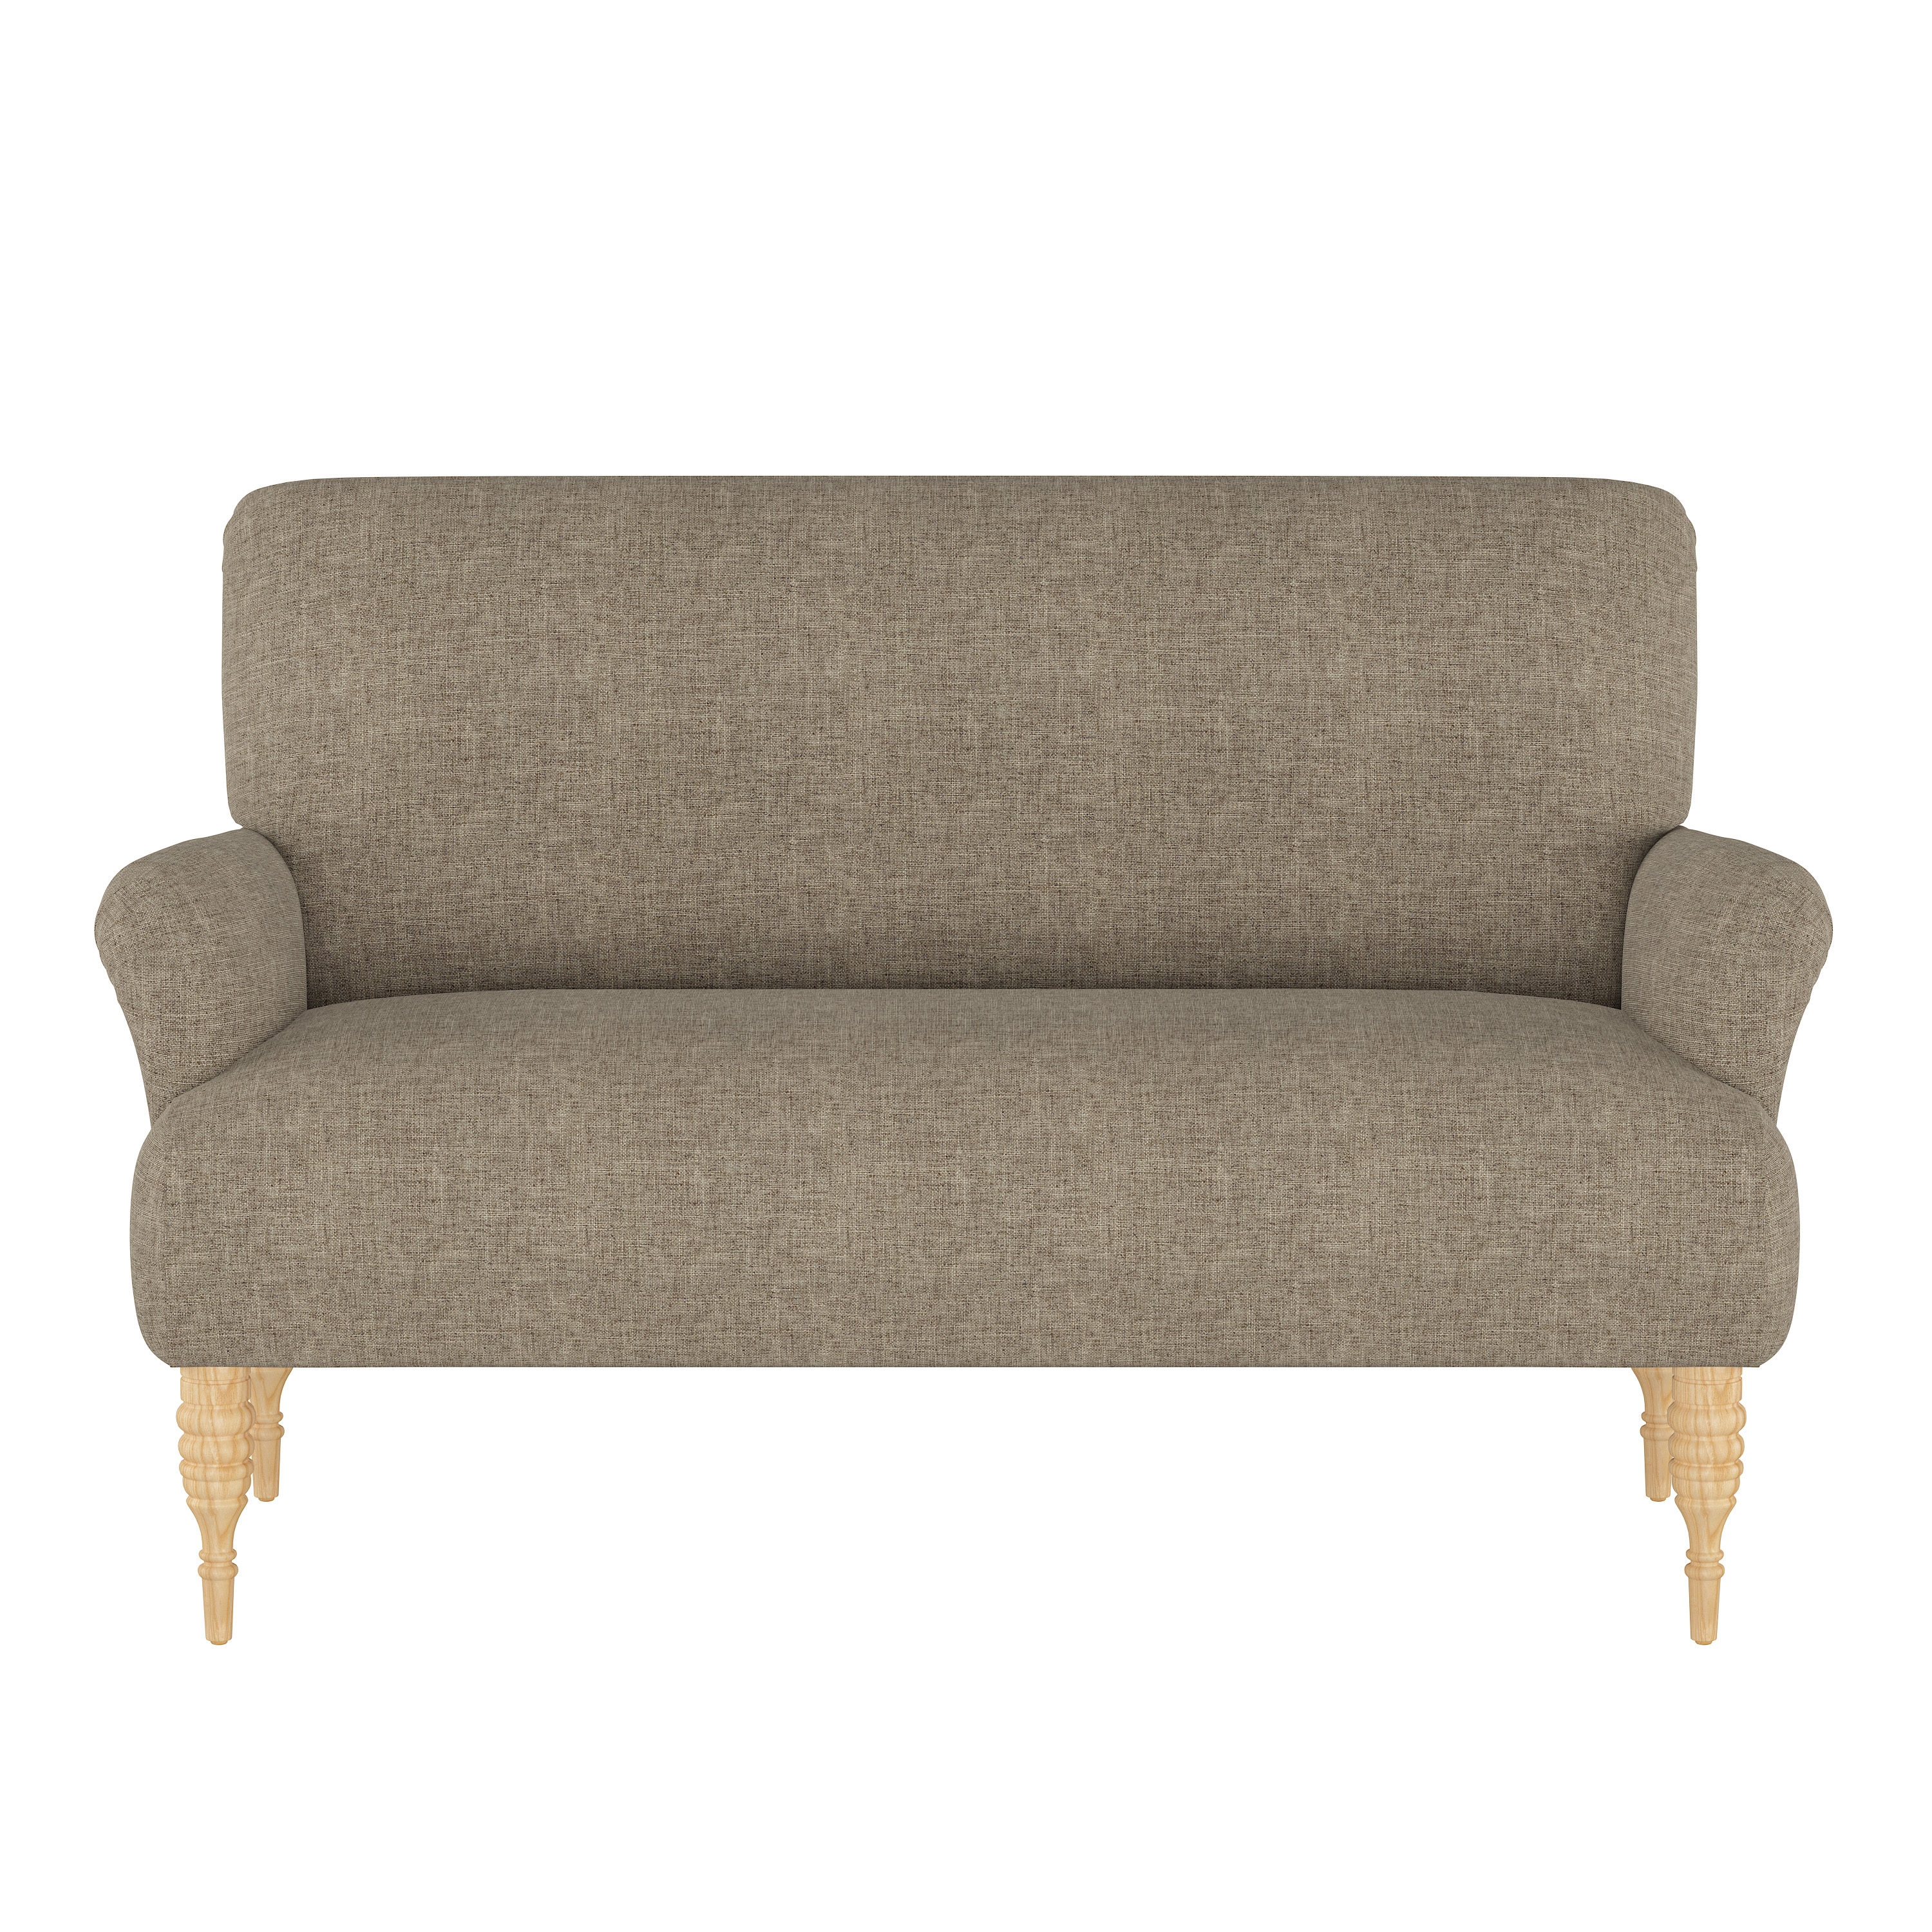 Clermont Settee, Linen - Image 1